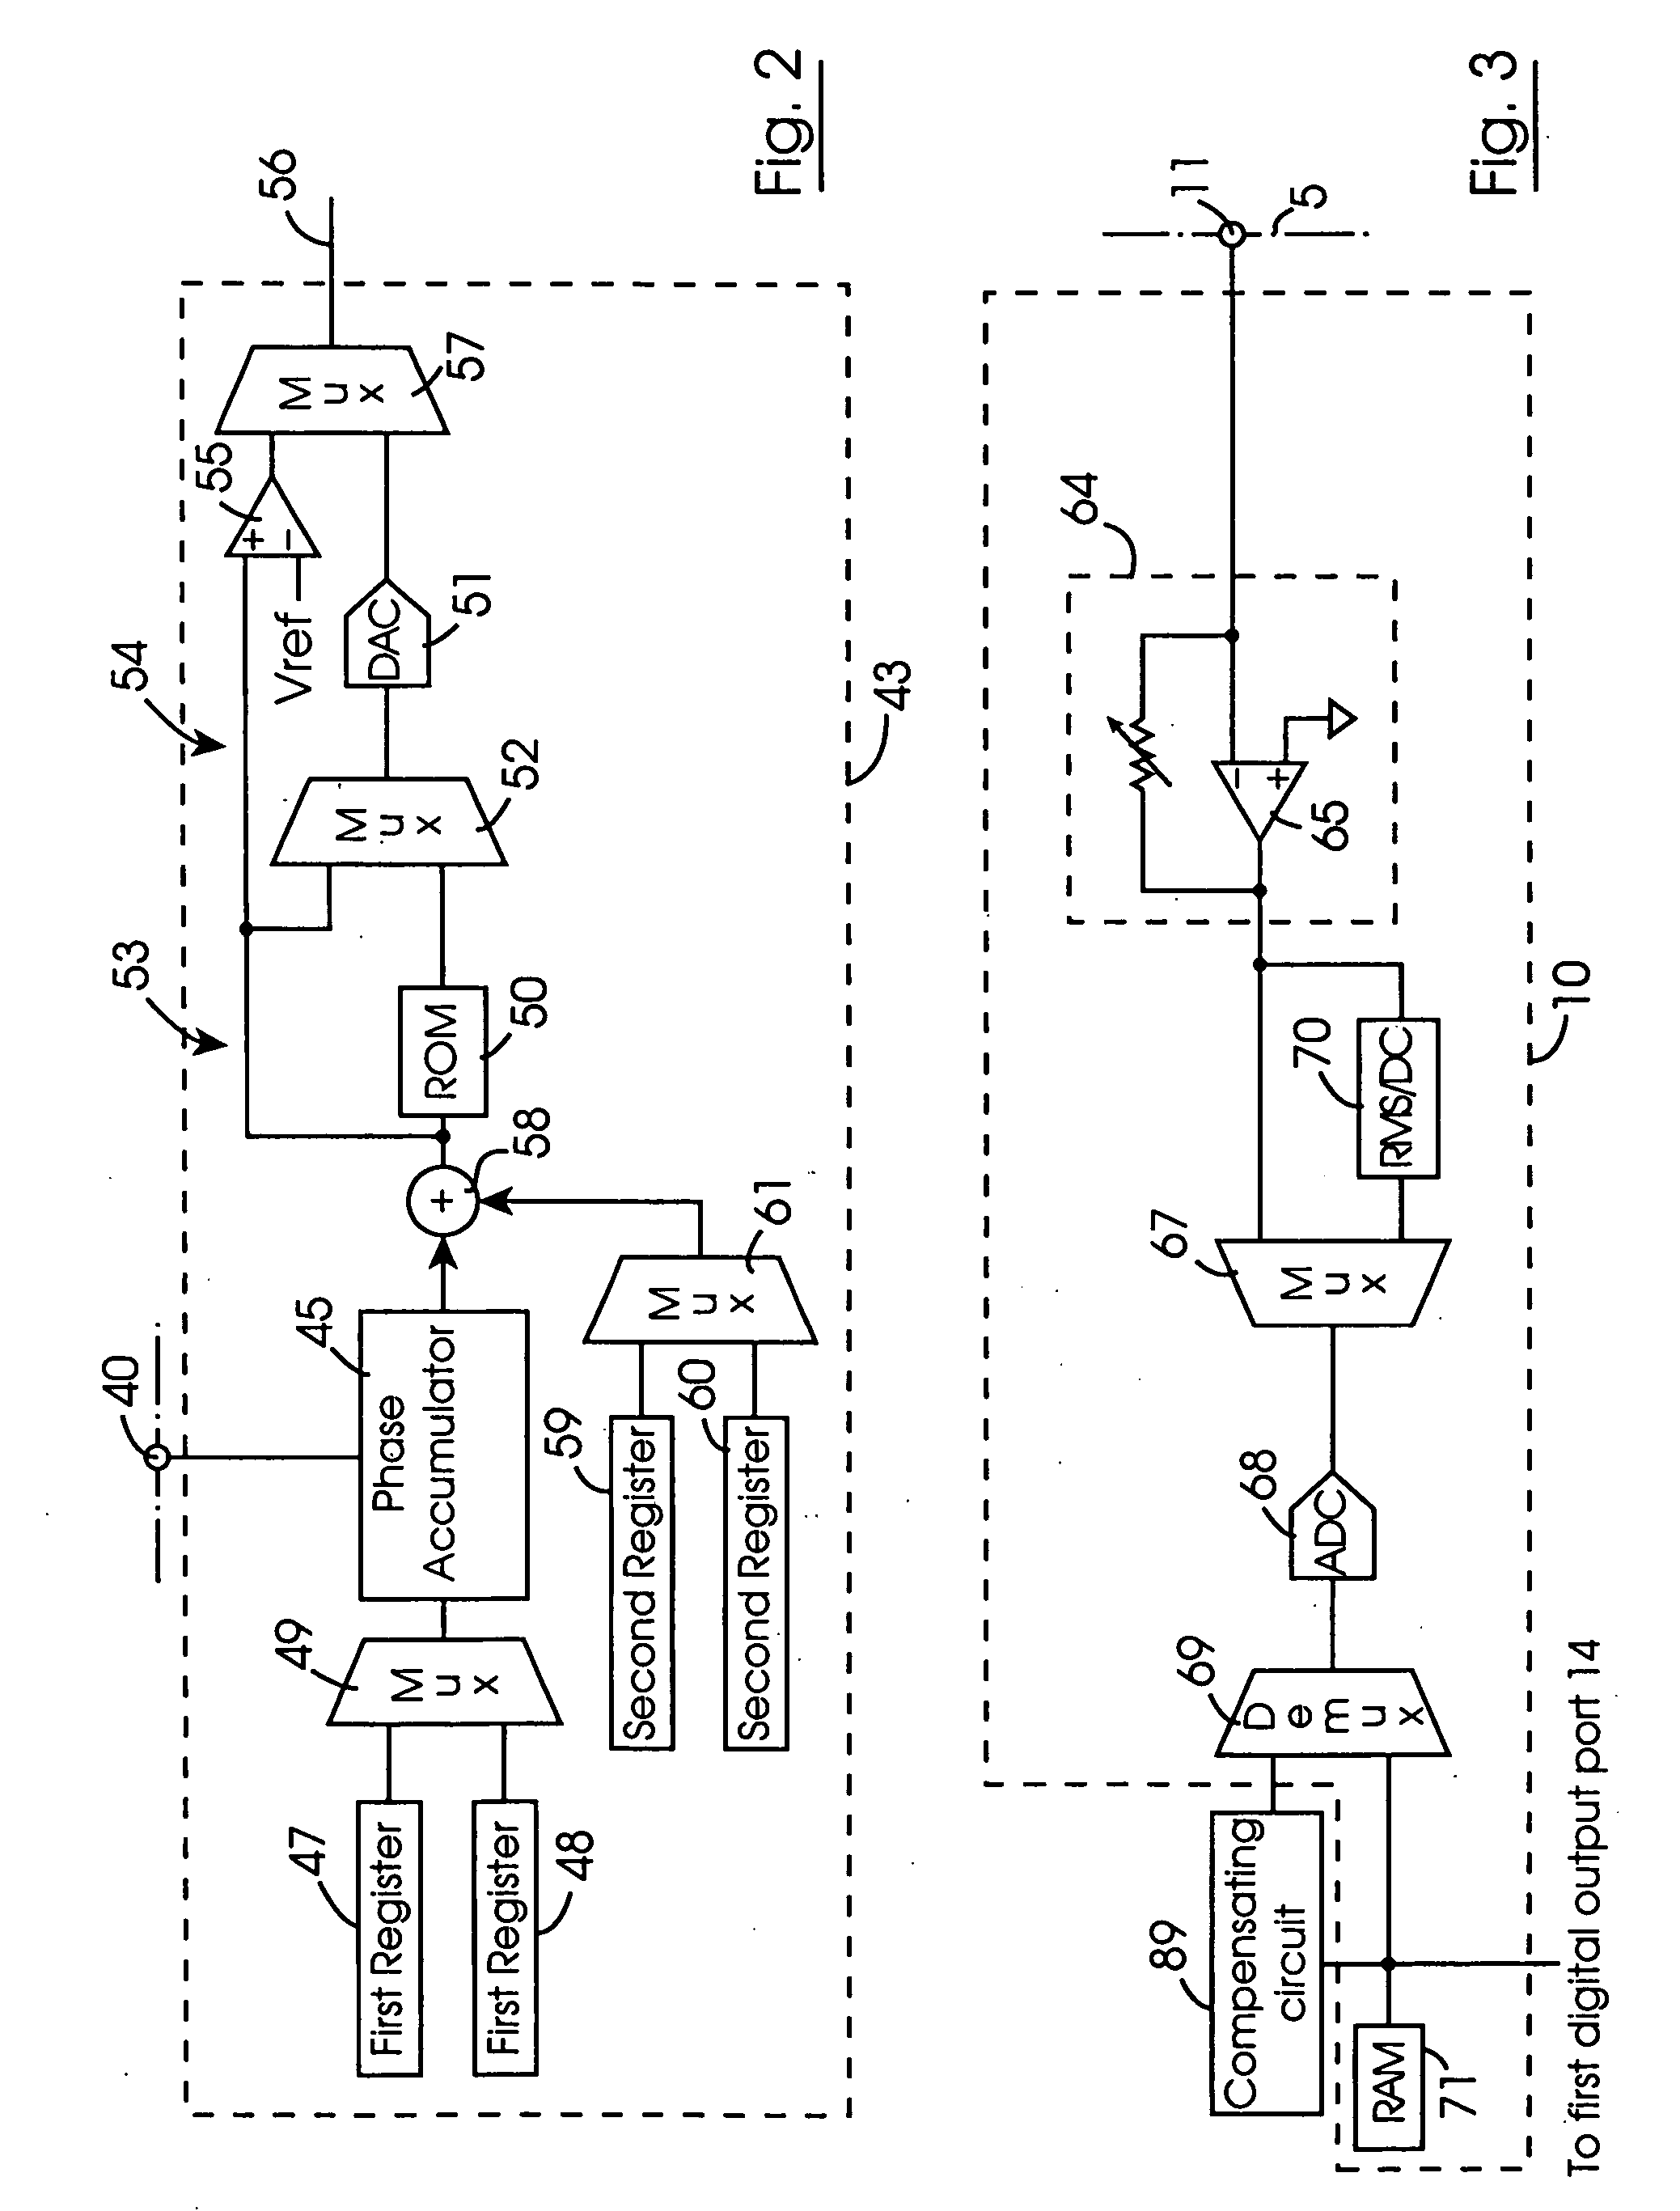 Measuring circuit and a method for determining a characteristic of the impedance of a complex impedance element for facilitating characterization of the impedance thereof